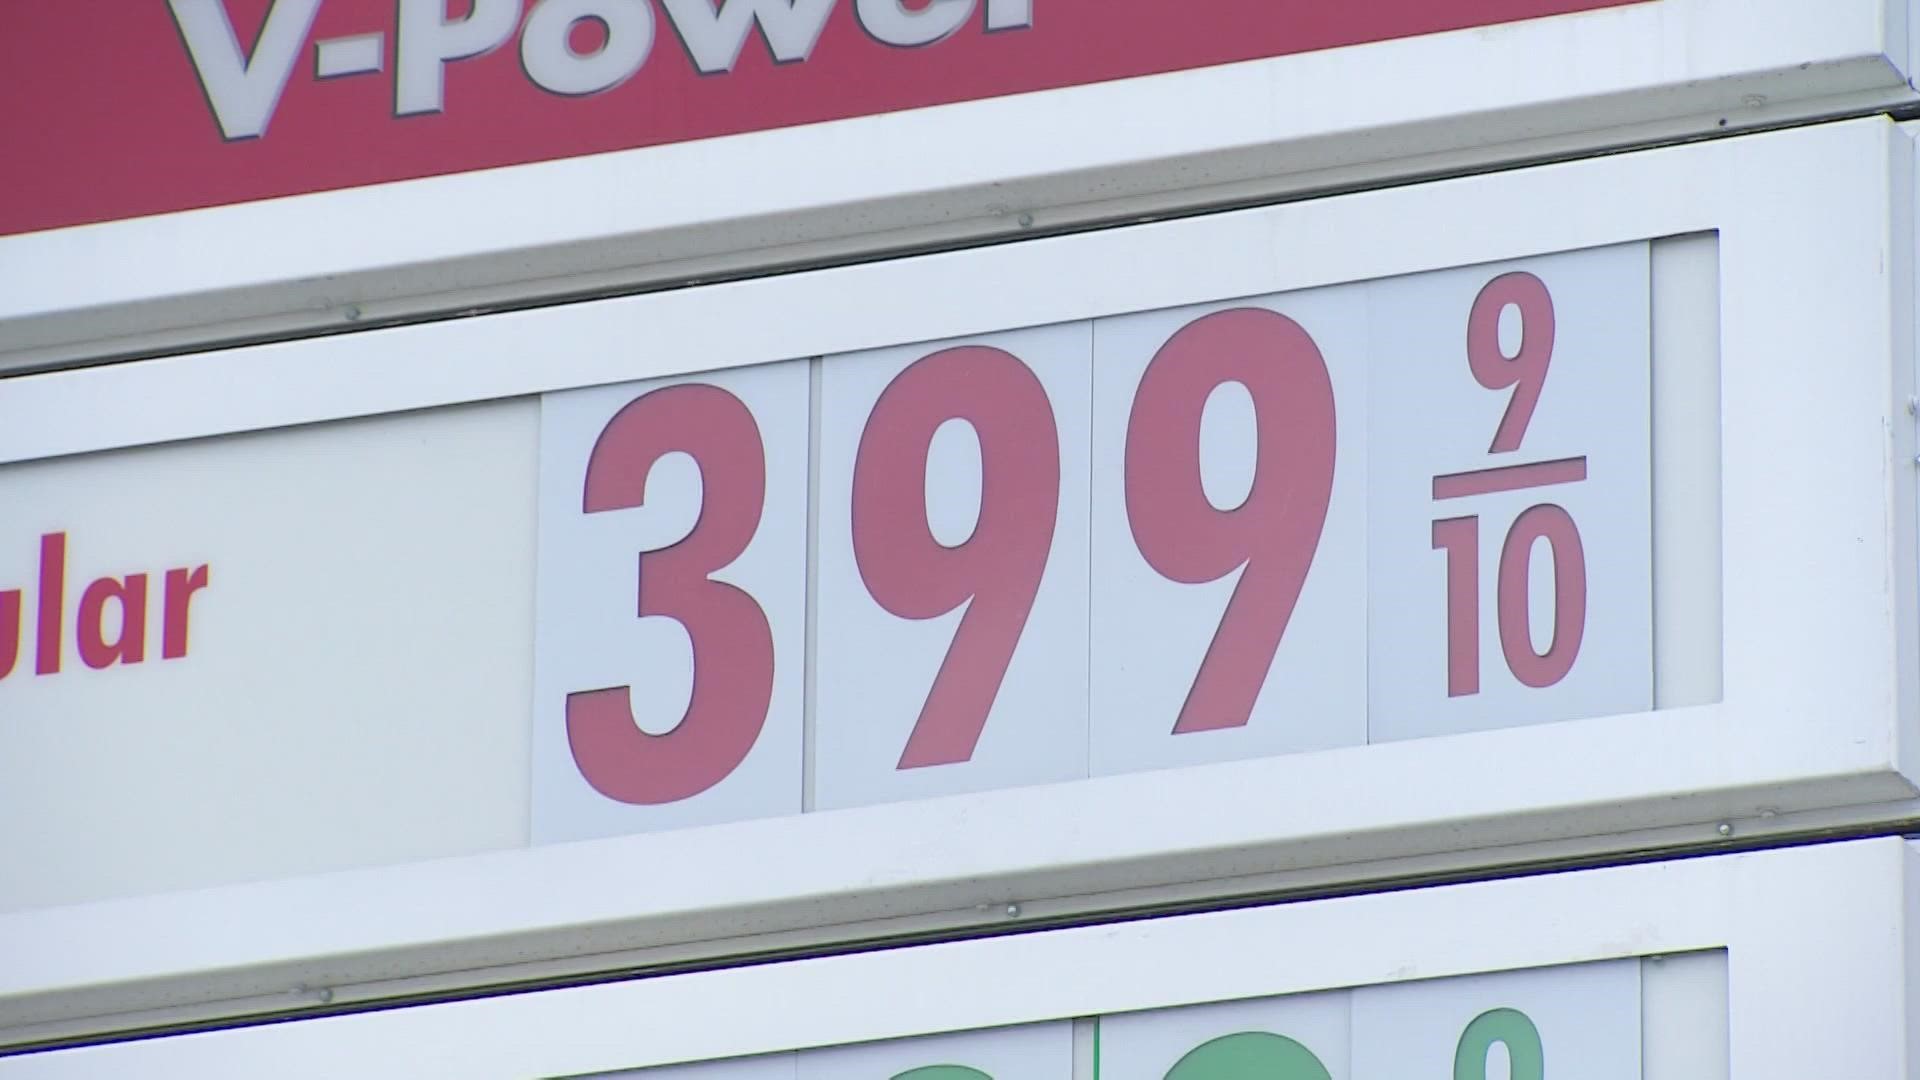 With gas prices surging to record highs, some lawmakers are proposing the suspension of gas taxes. Here's how that process would work and how much you could save.